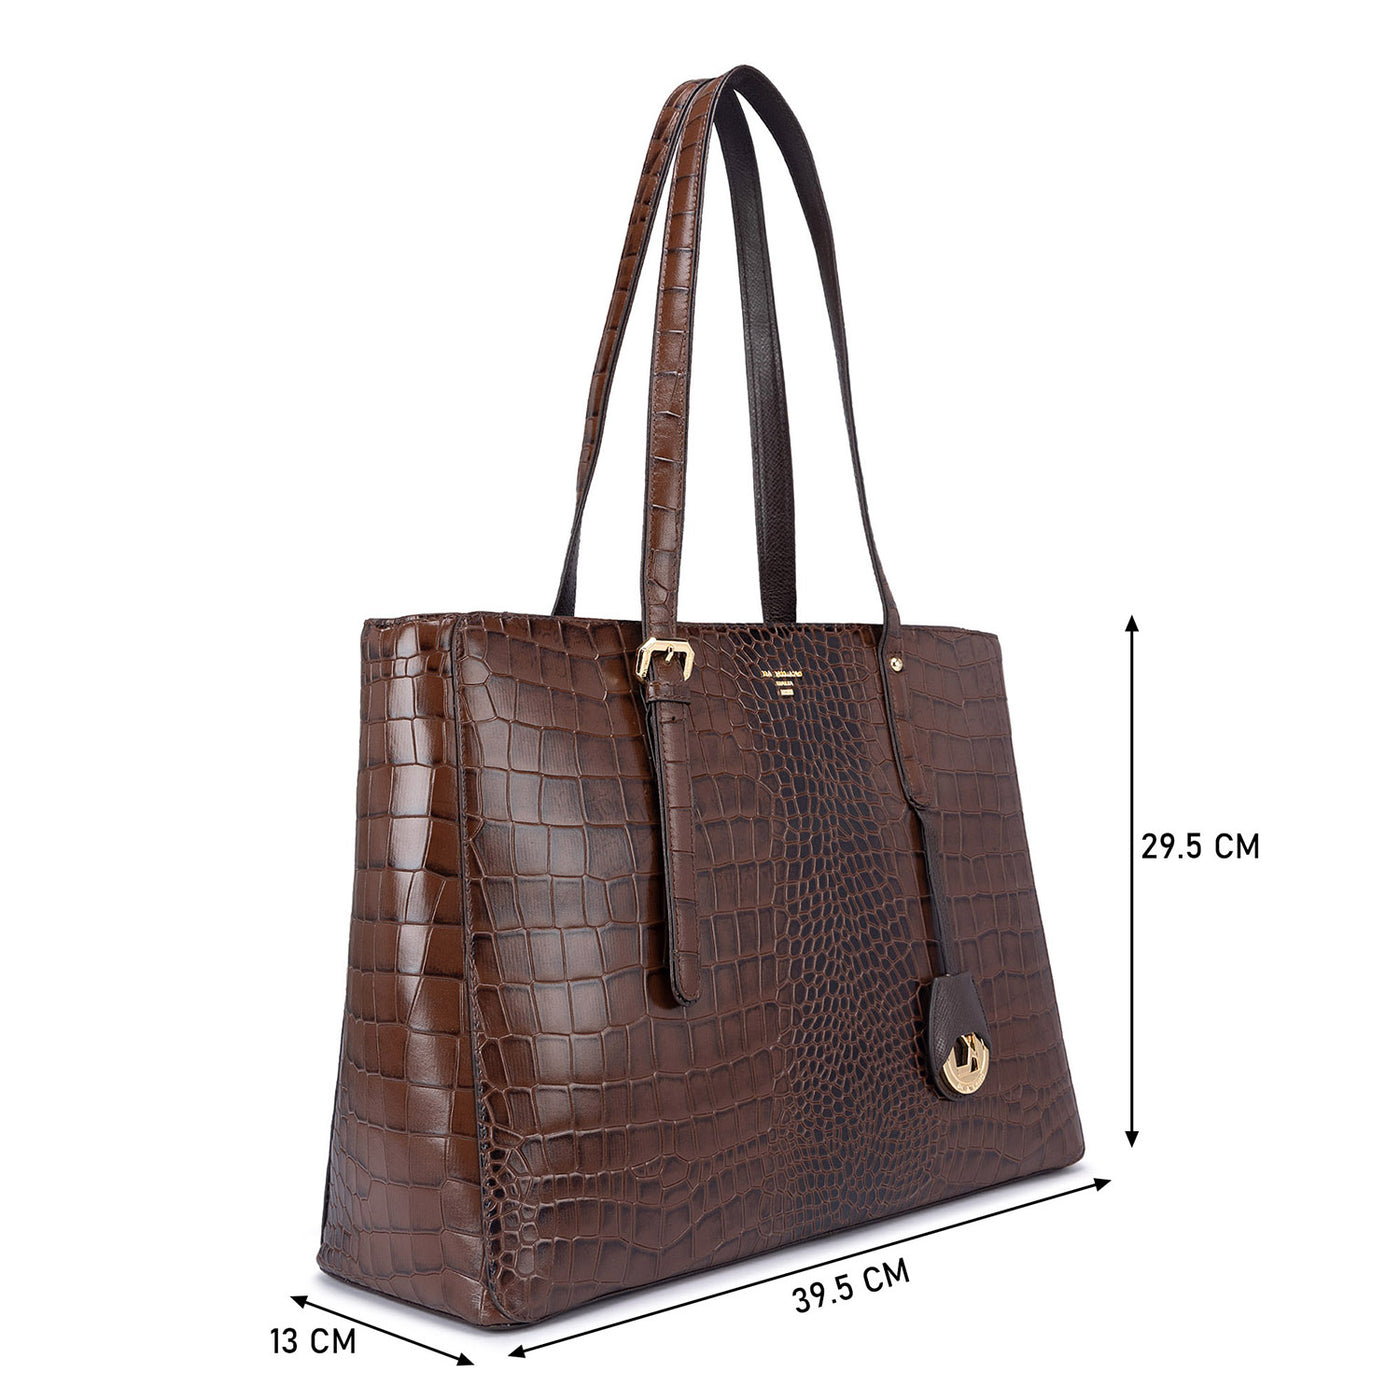 Large Croco Leather Tote - Brown